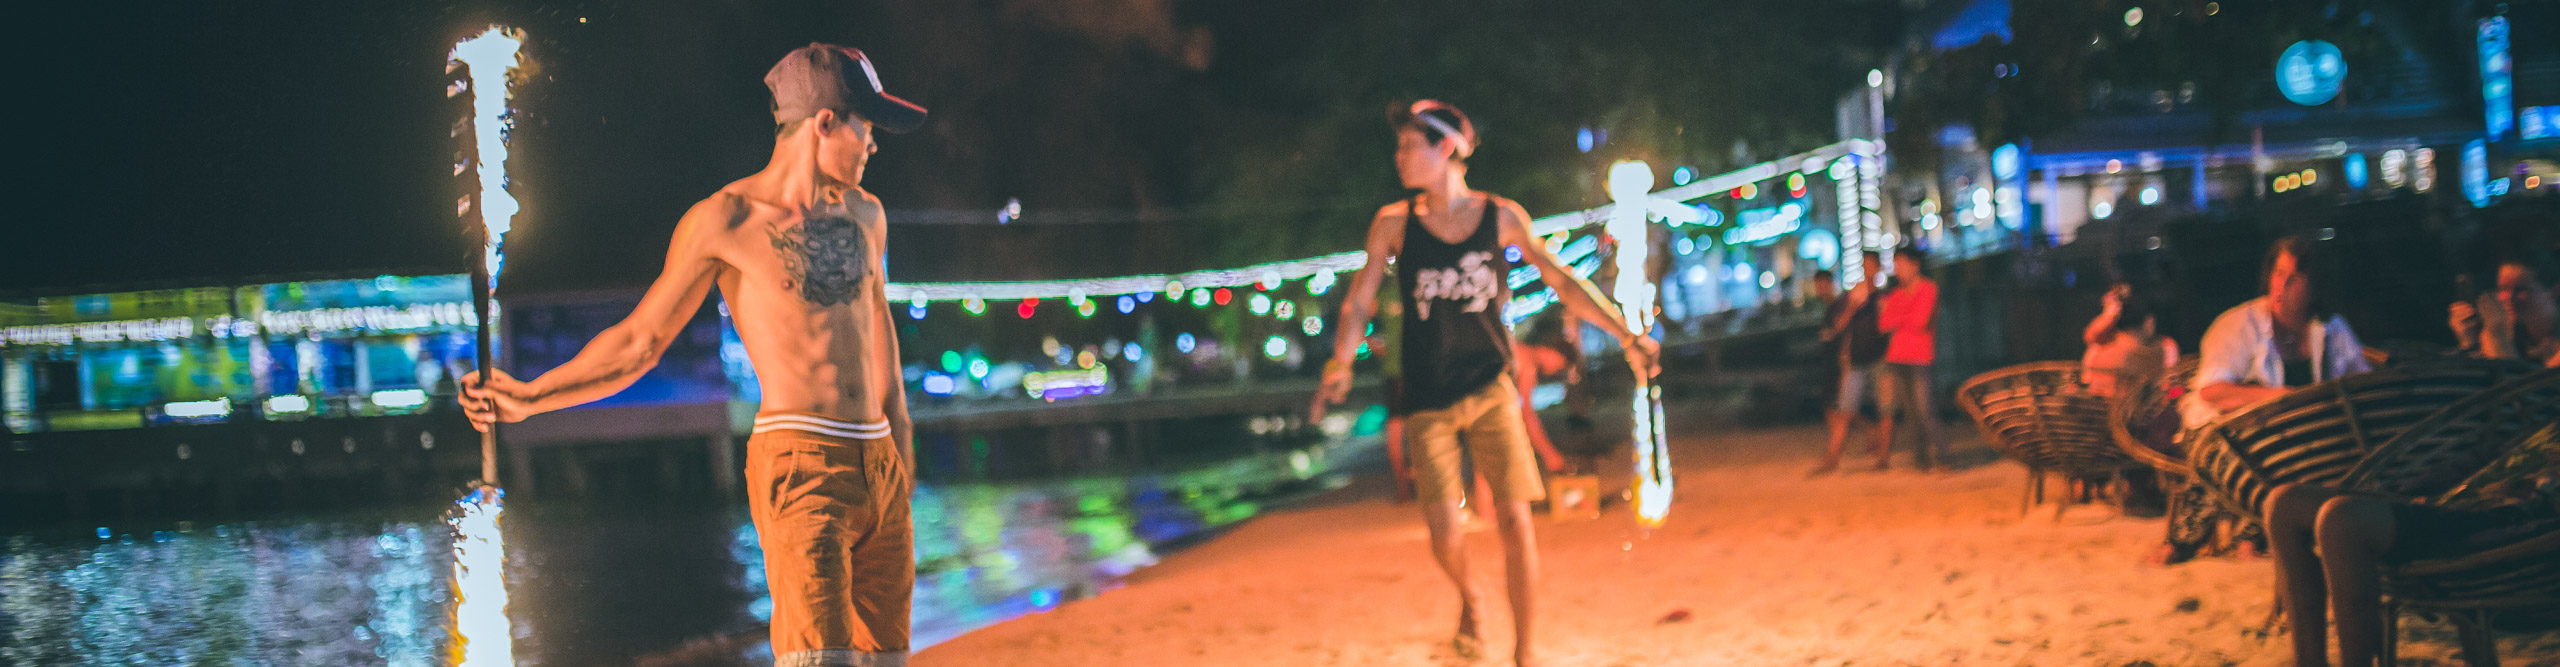 People fire dancing on the beach with water in the distance and coloured light at night, Cambodia